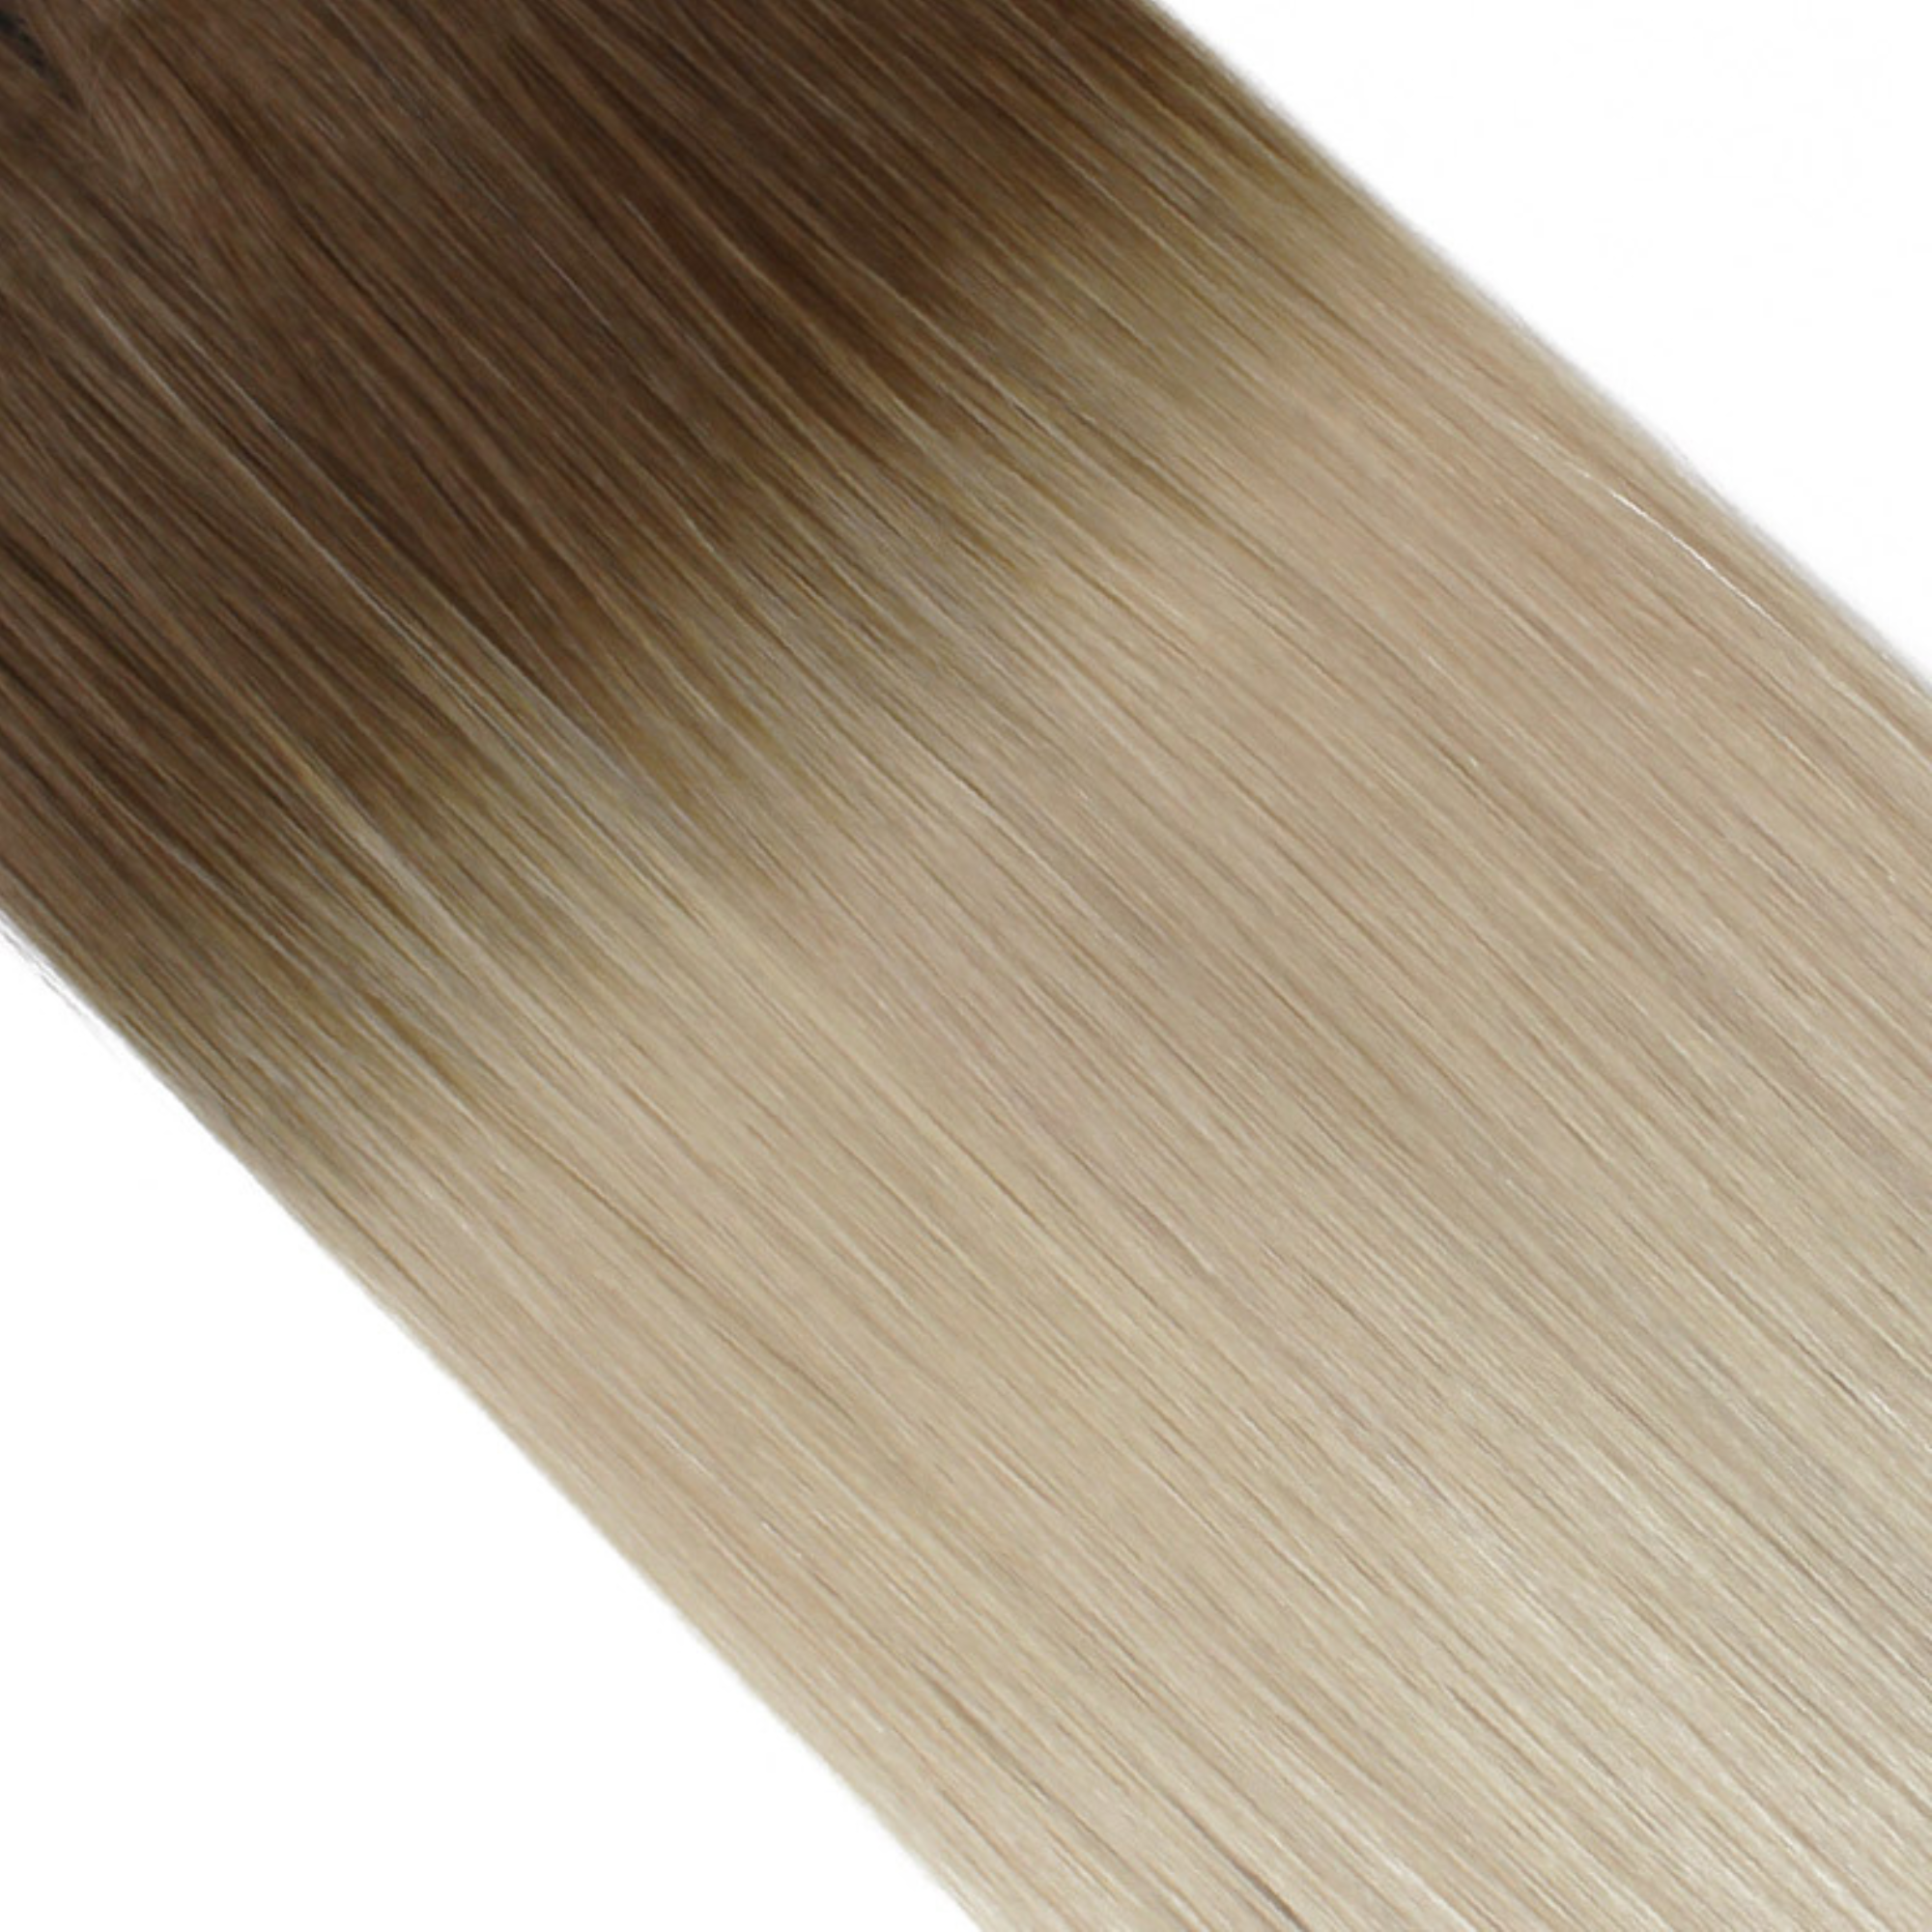 "hair rehab london 18" weft hair extensions shade swatch titled rooted blonde af"